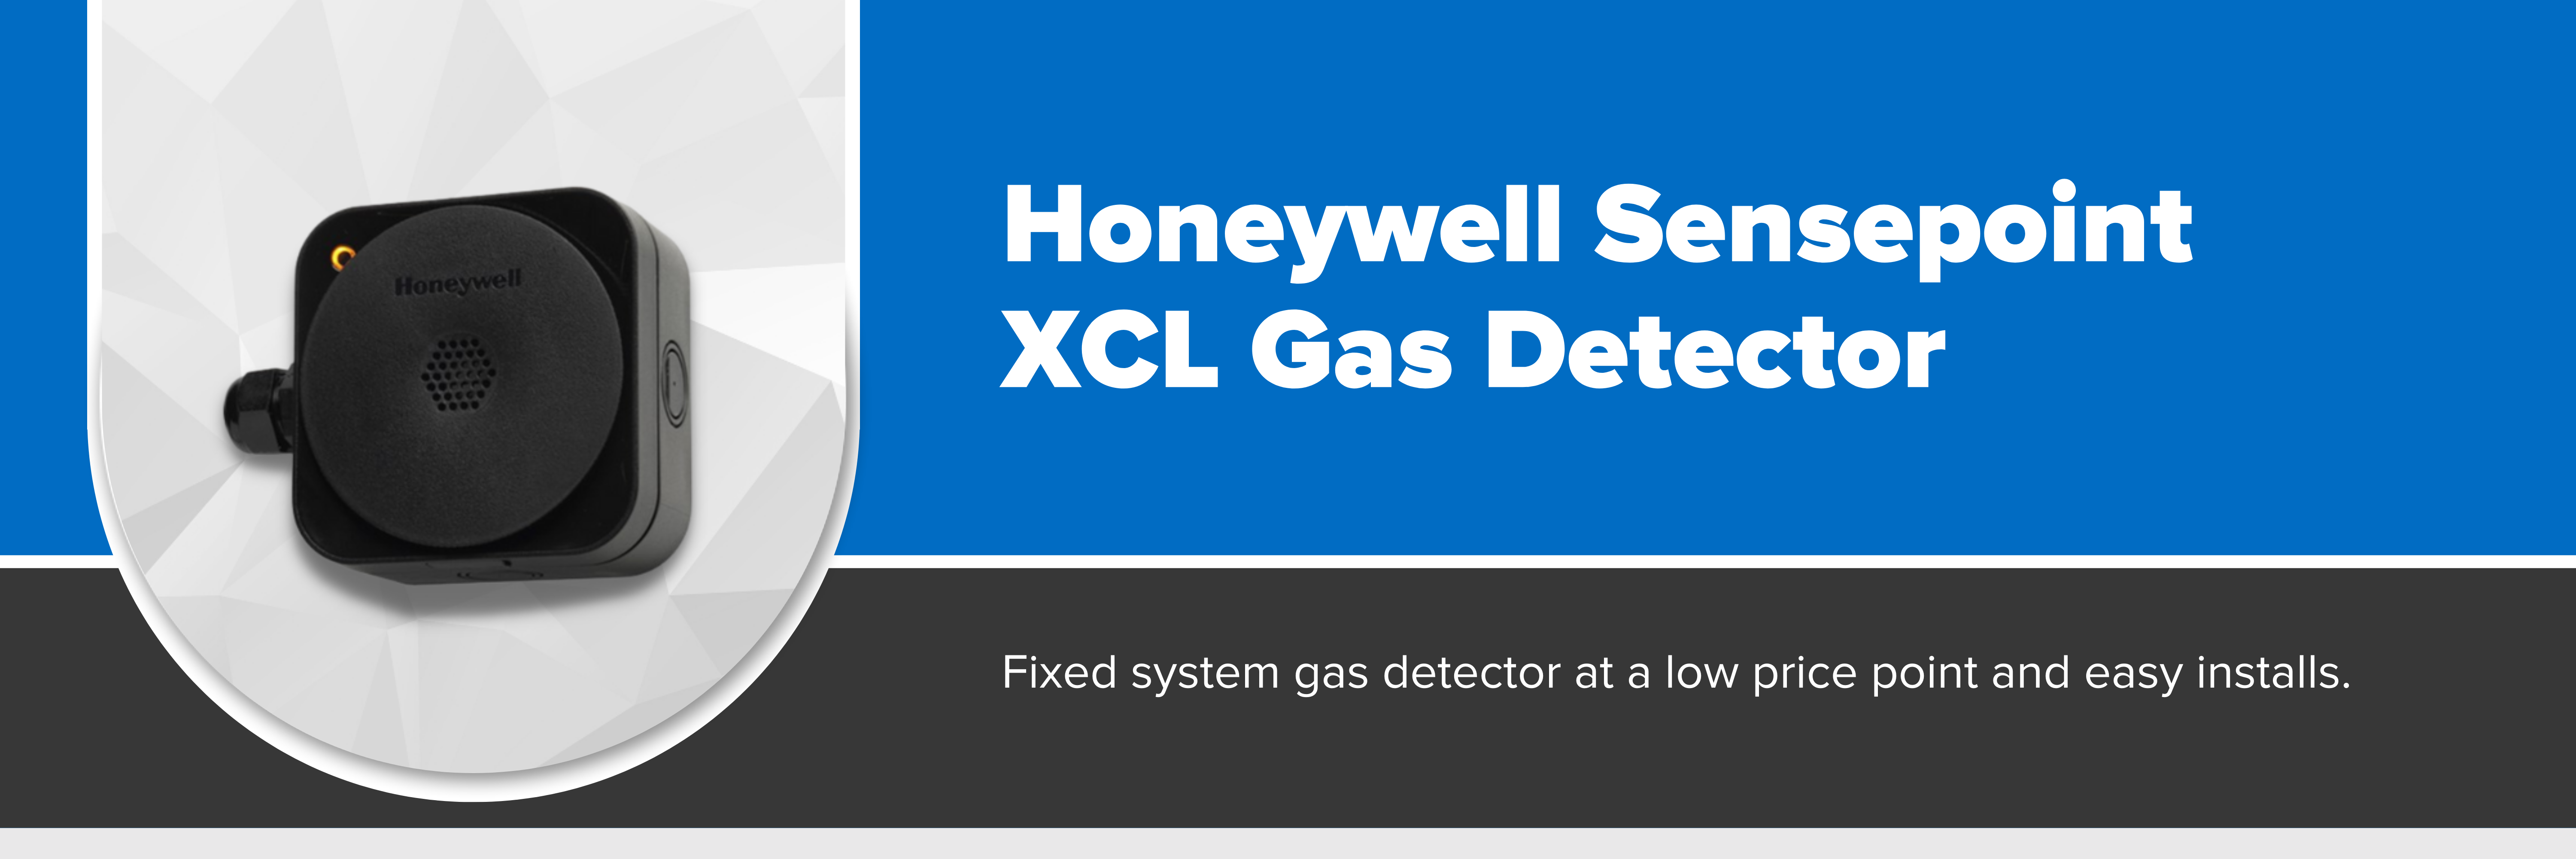 Header image with text "Honeywell Sensepoint XCL Gas Detector"